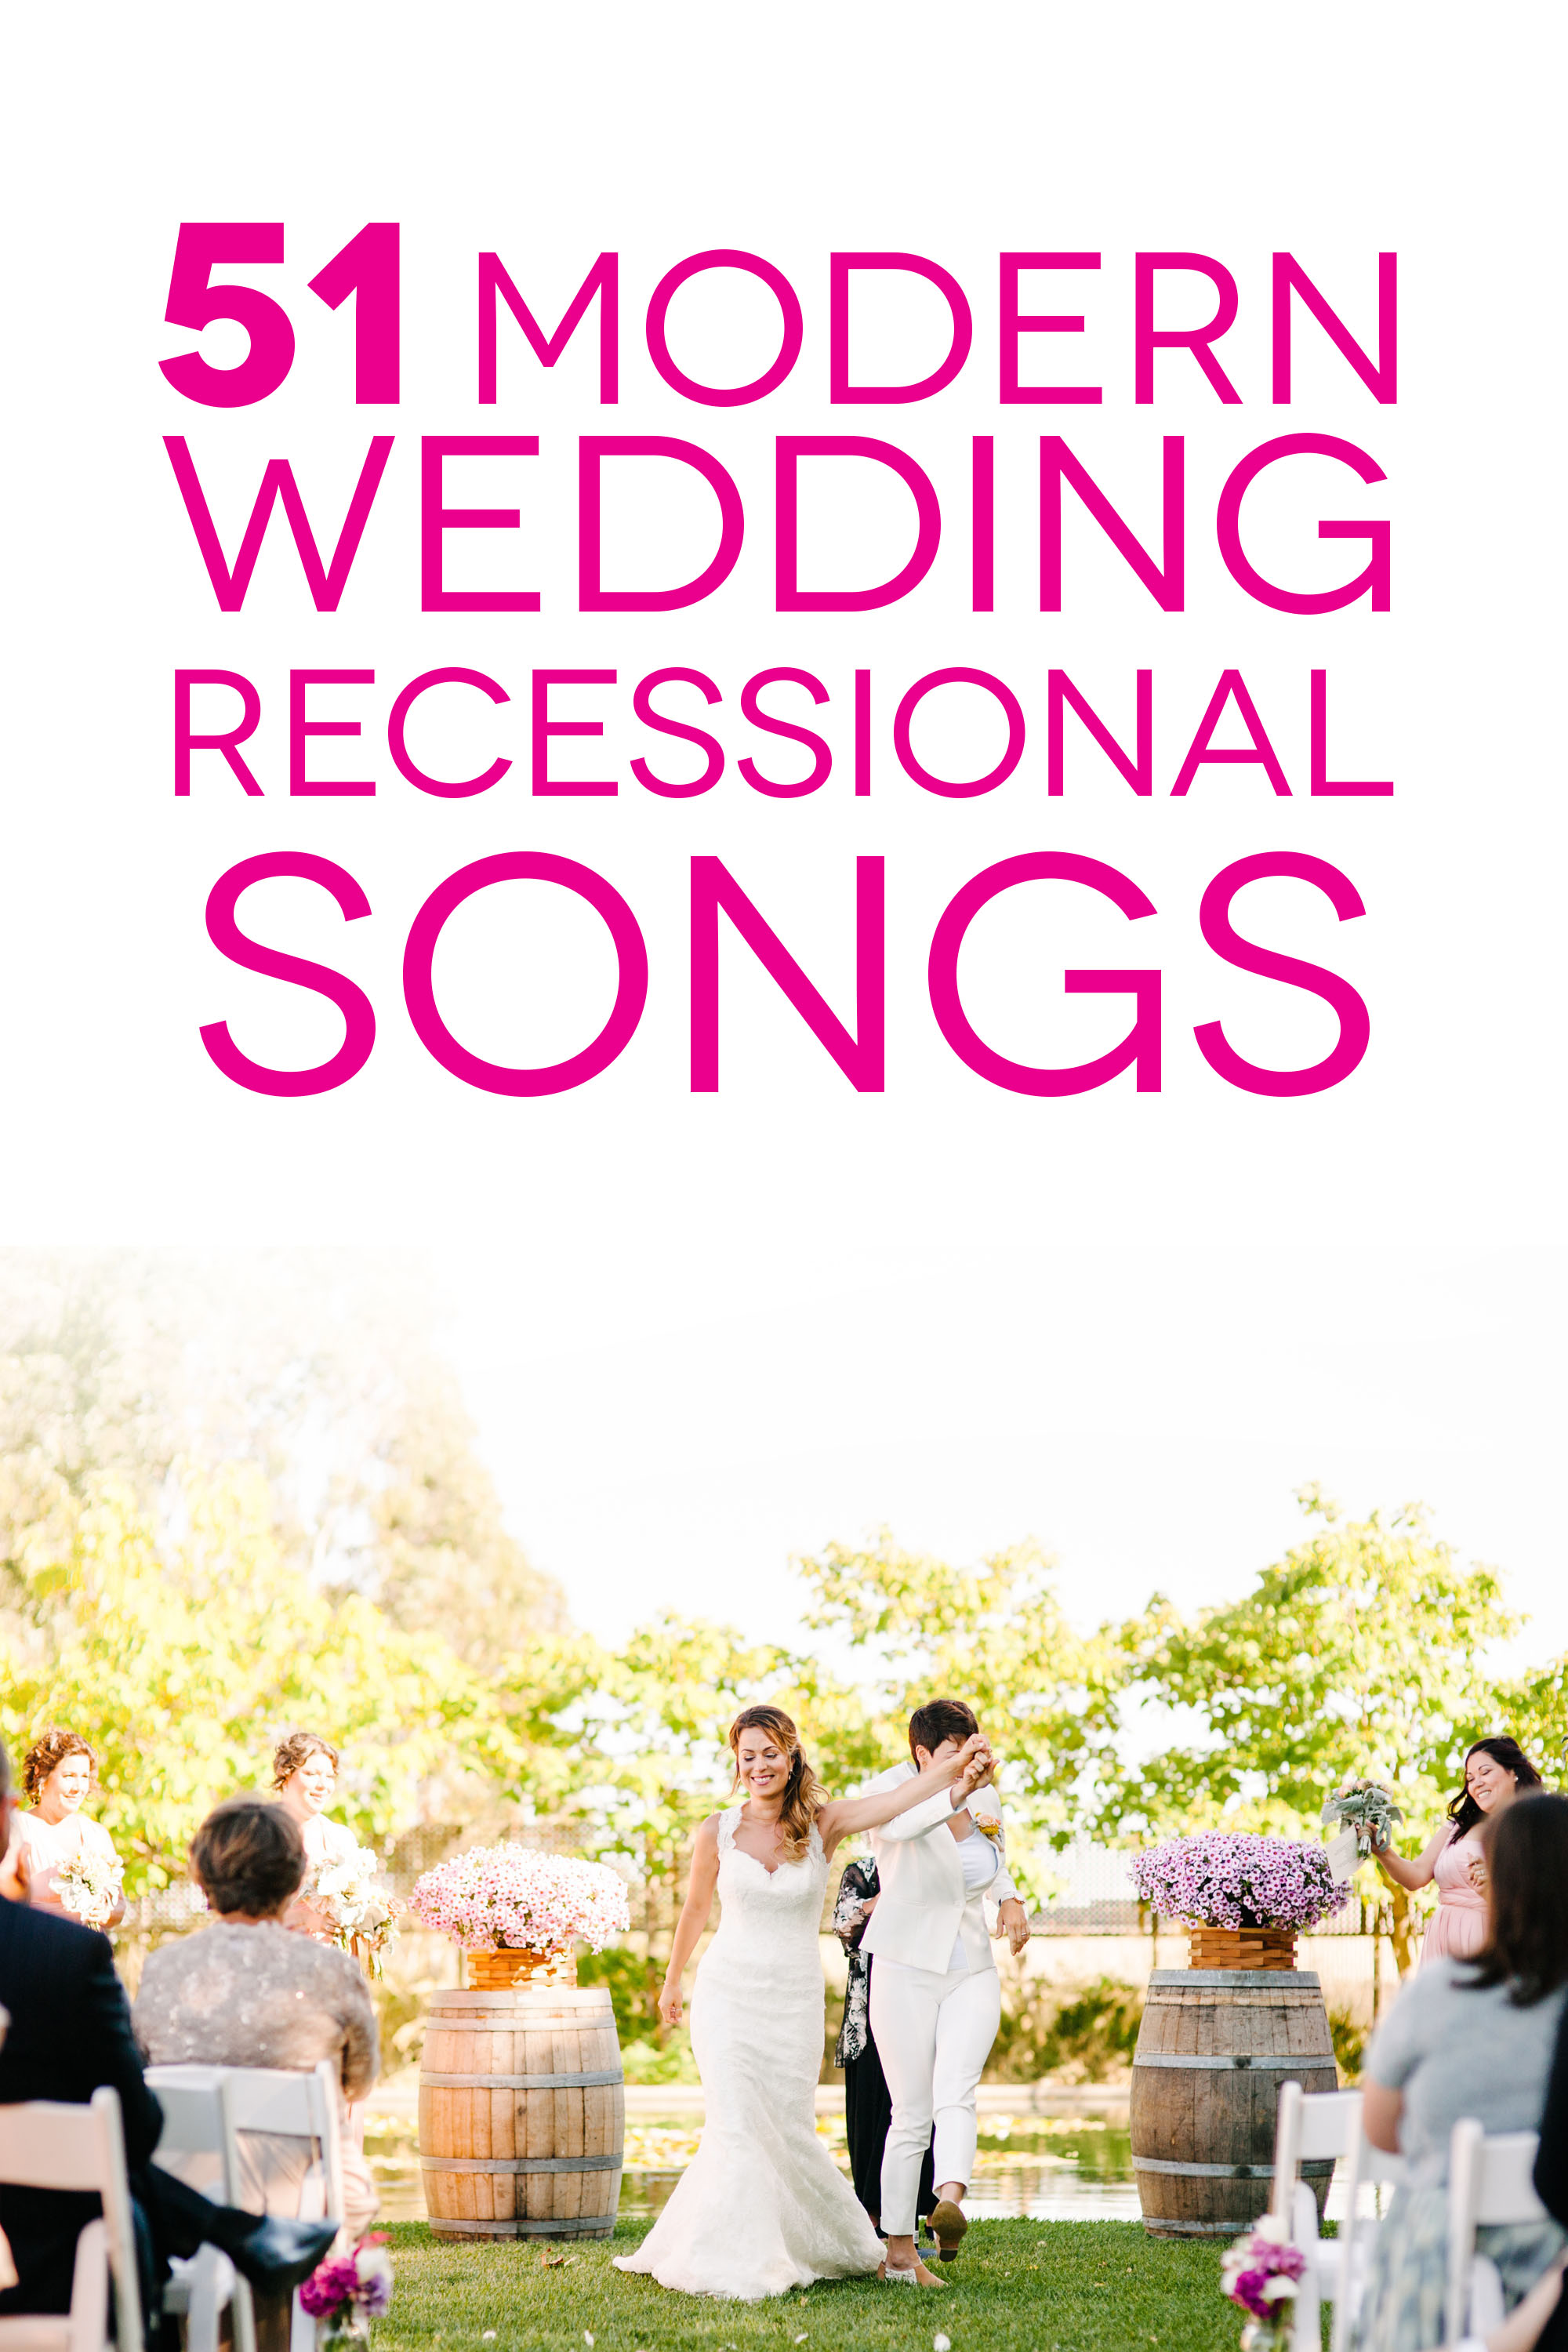 Wedding Recessional Songs to Help You Dance into the Sunset A